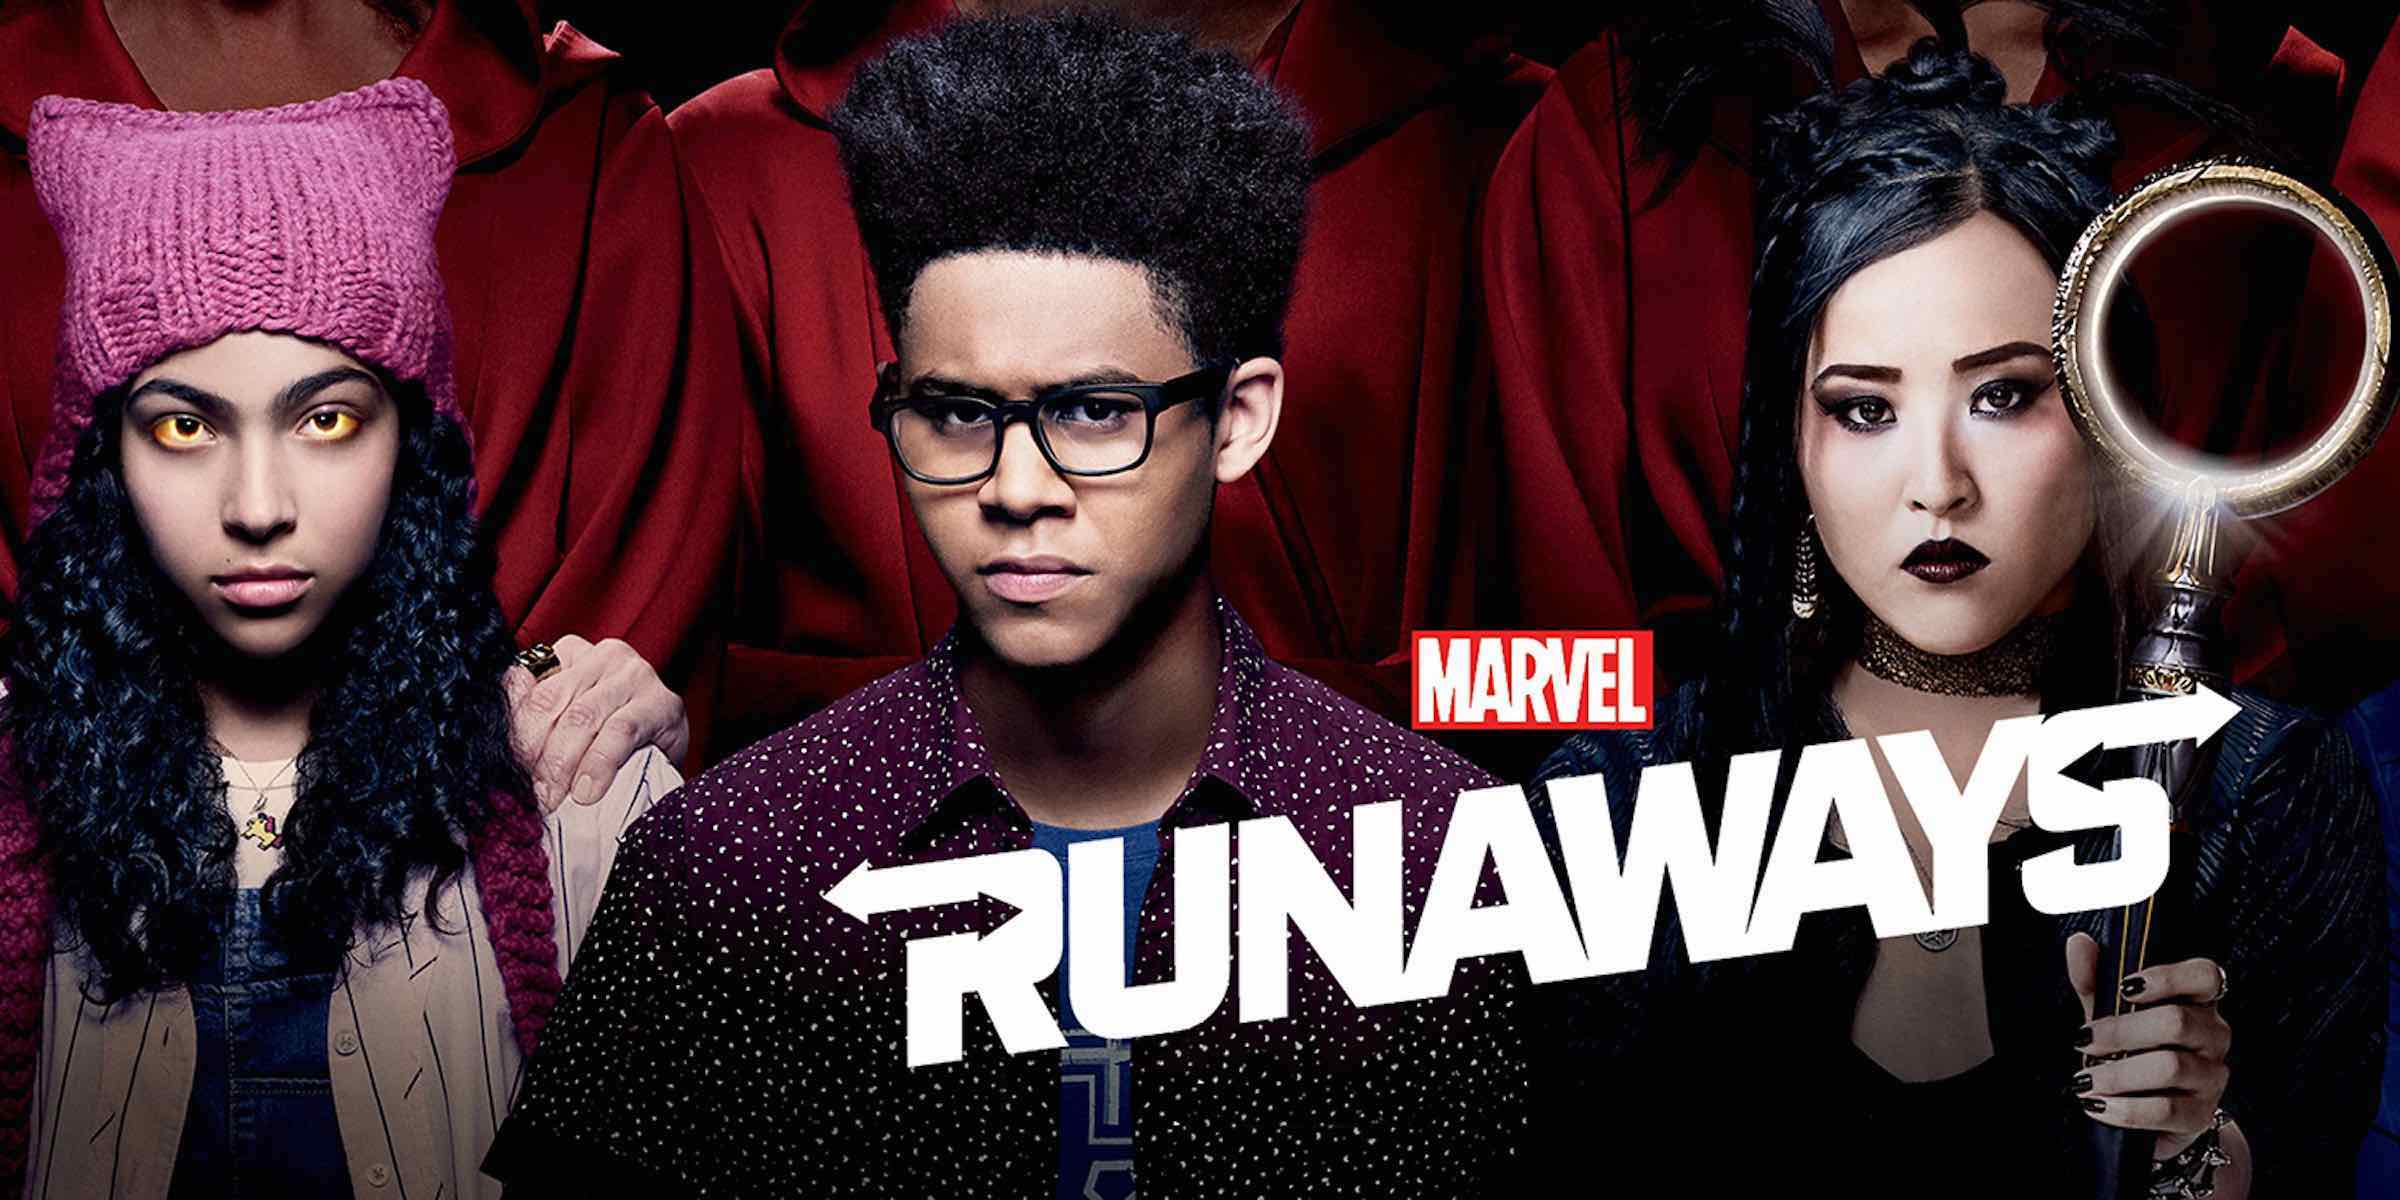 After the announcement that 'Marvel's Runaways' with Virginia Gardner ends following its third season on Hulu, will it get a satisfying ending?